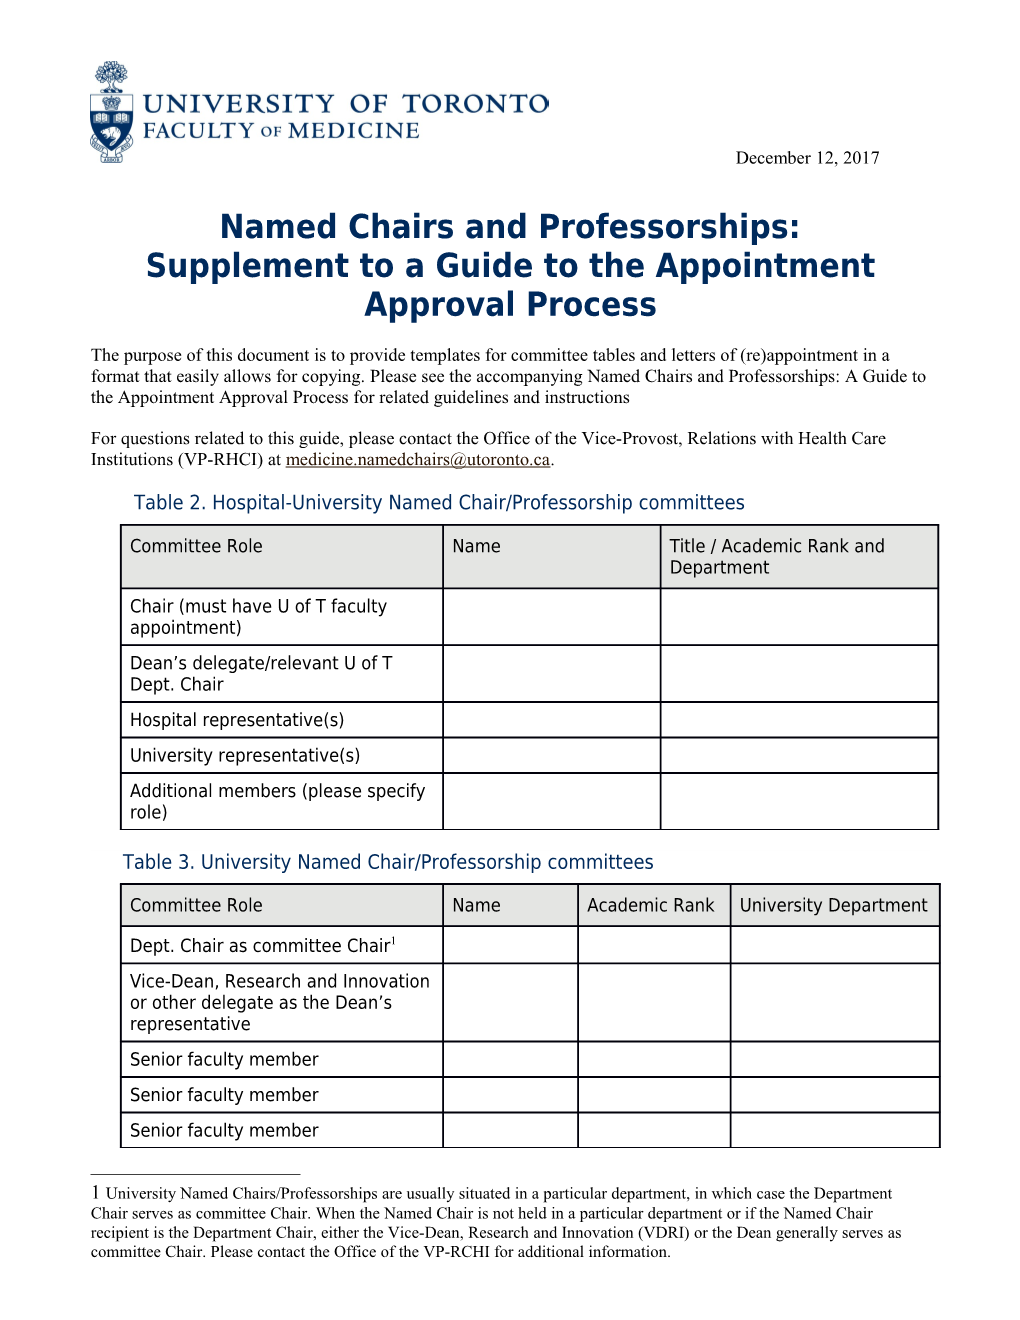 Supplement to a Guide to the Appointment Approval Process